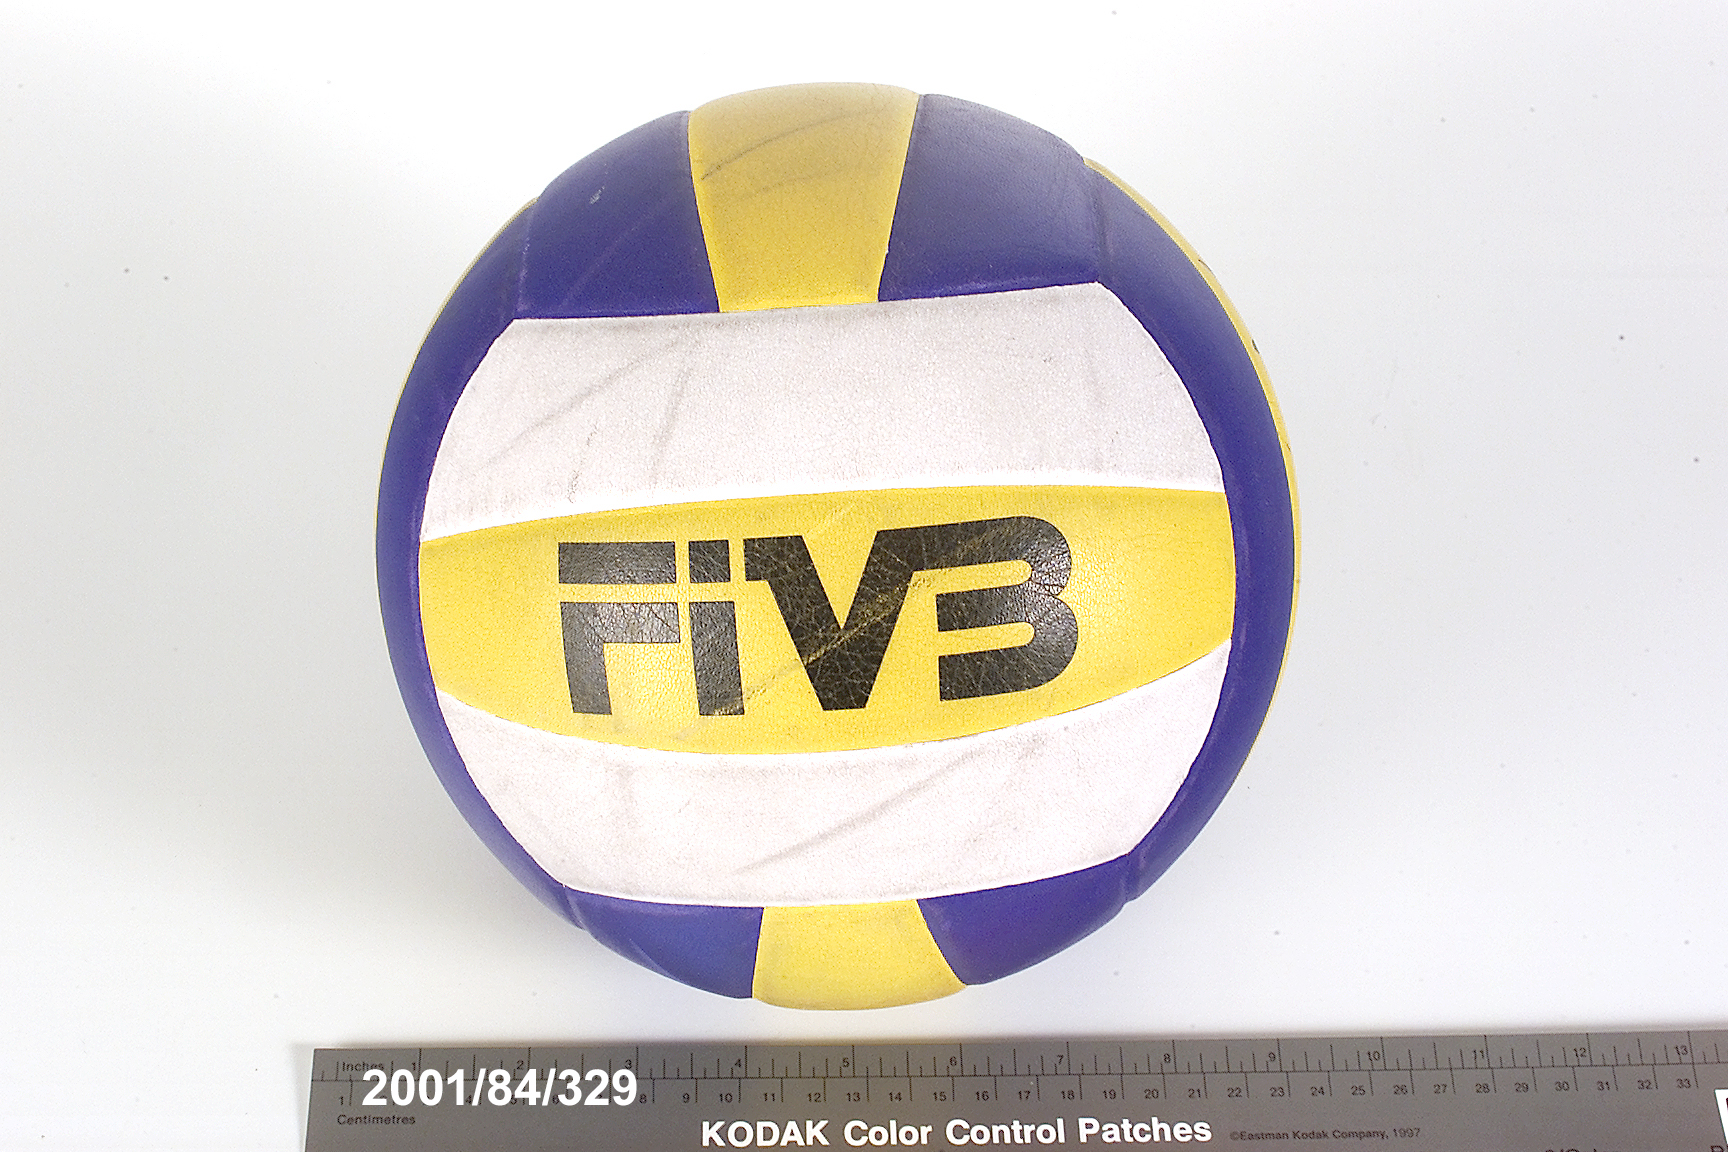 Volleyball for the Sydney Olympic Games made by Mikasa